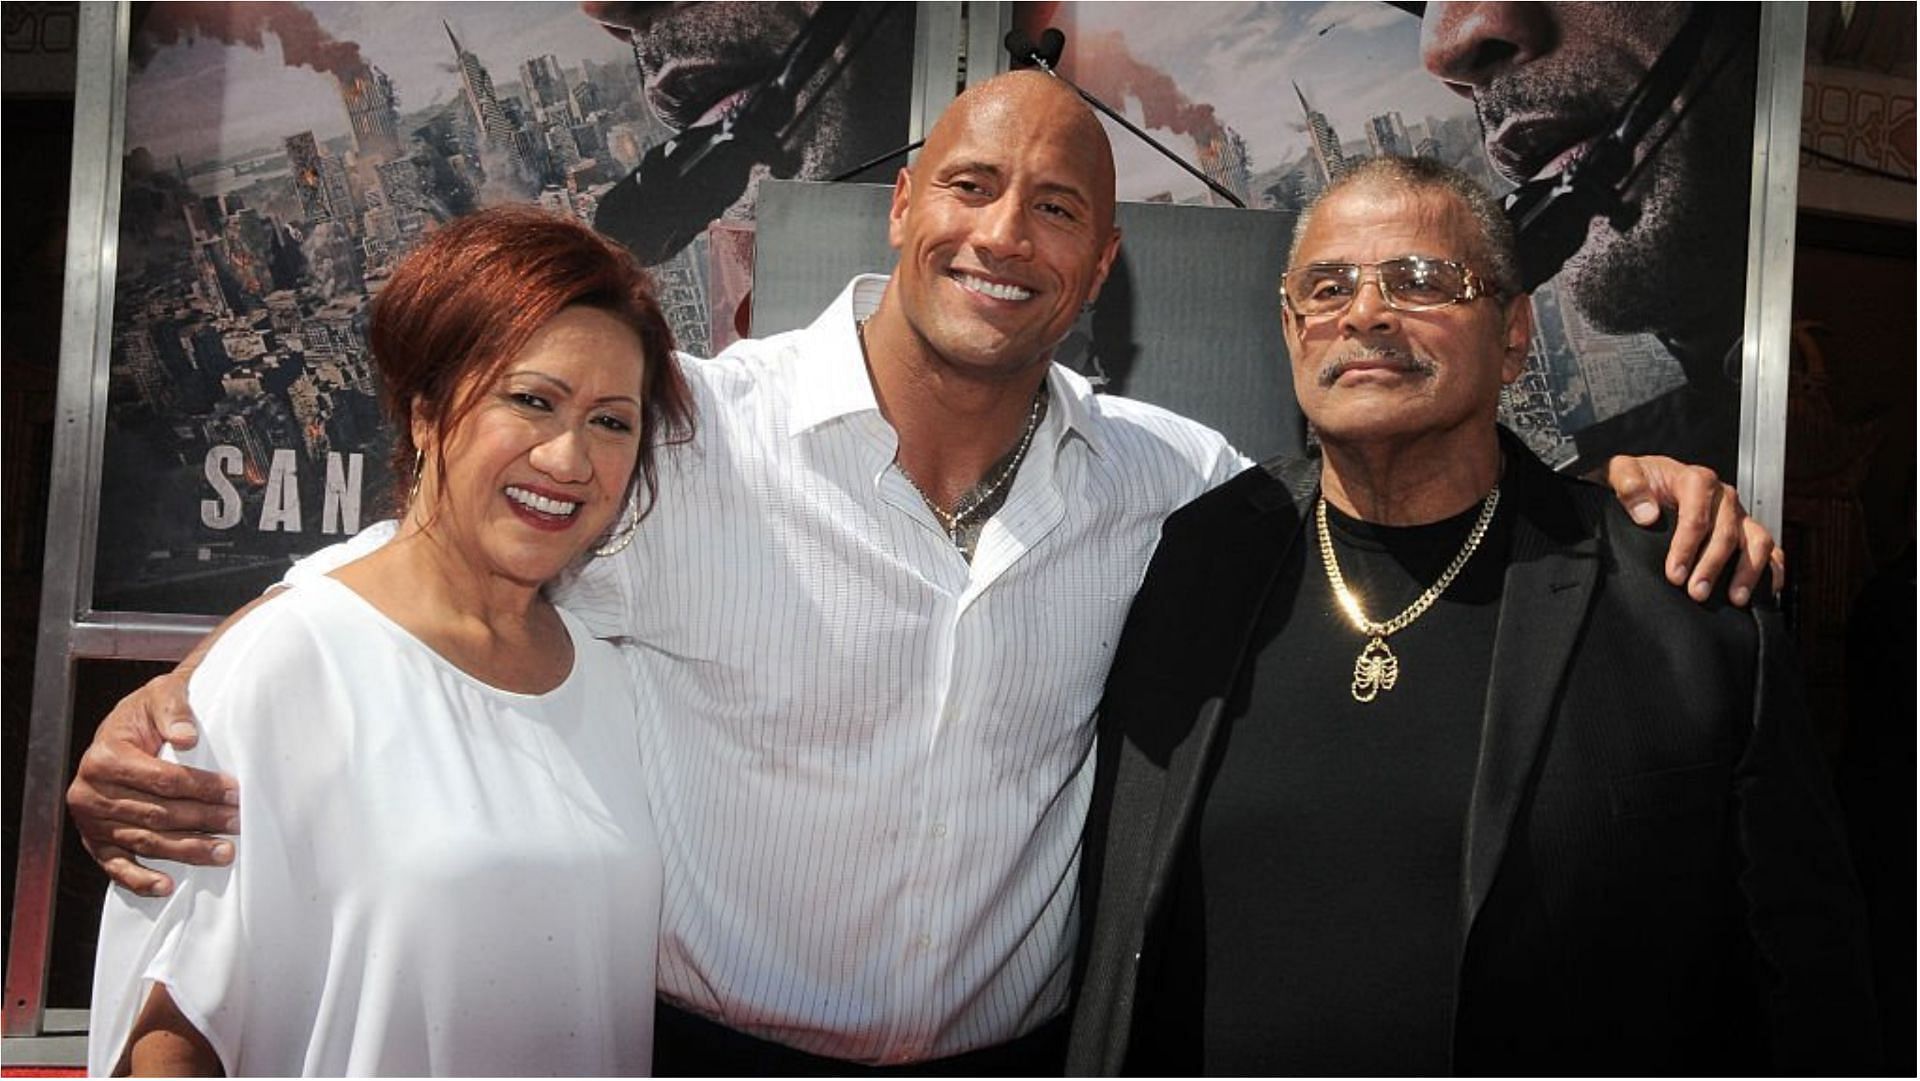 Dwayne Johnson with his parents at the Hand And Footprint Ceremony held at TCL Chinese Theatre IMAX (Image via Albert L. Ortega/Getty Images)